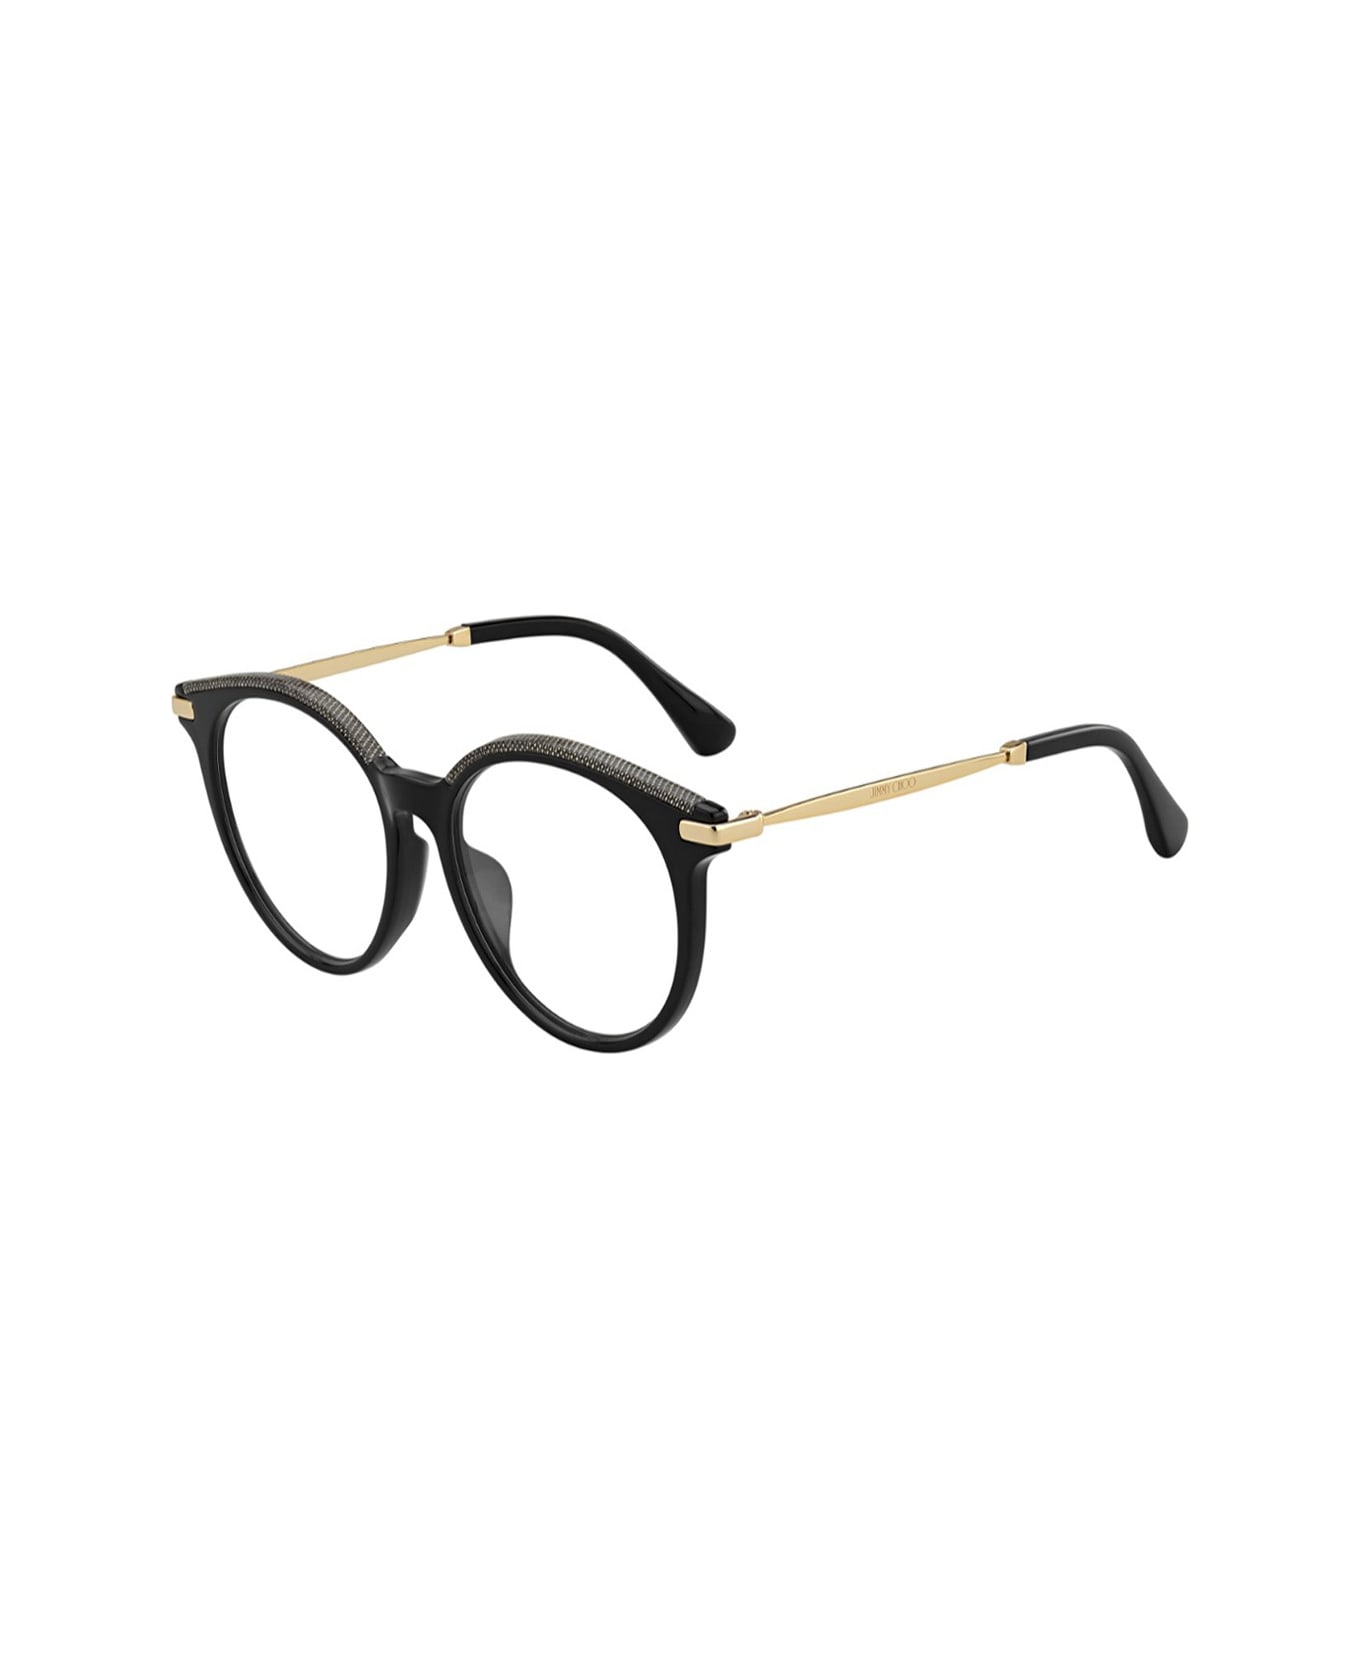 for further details Jc254/f Glasses - Nero